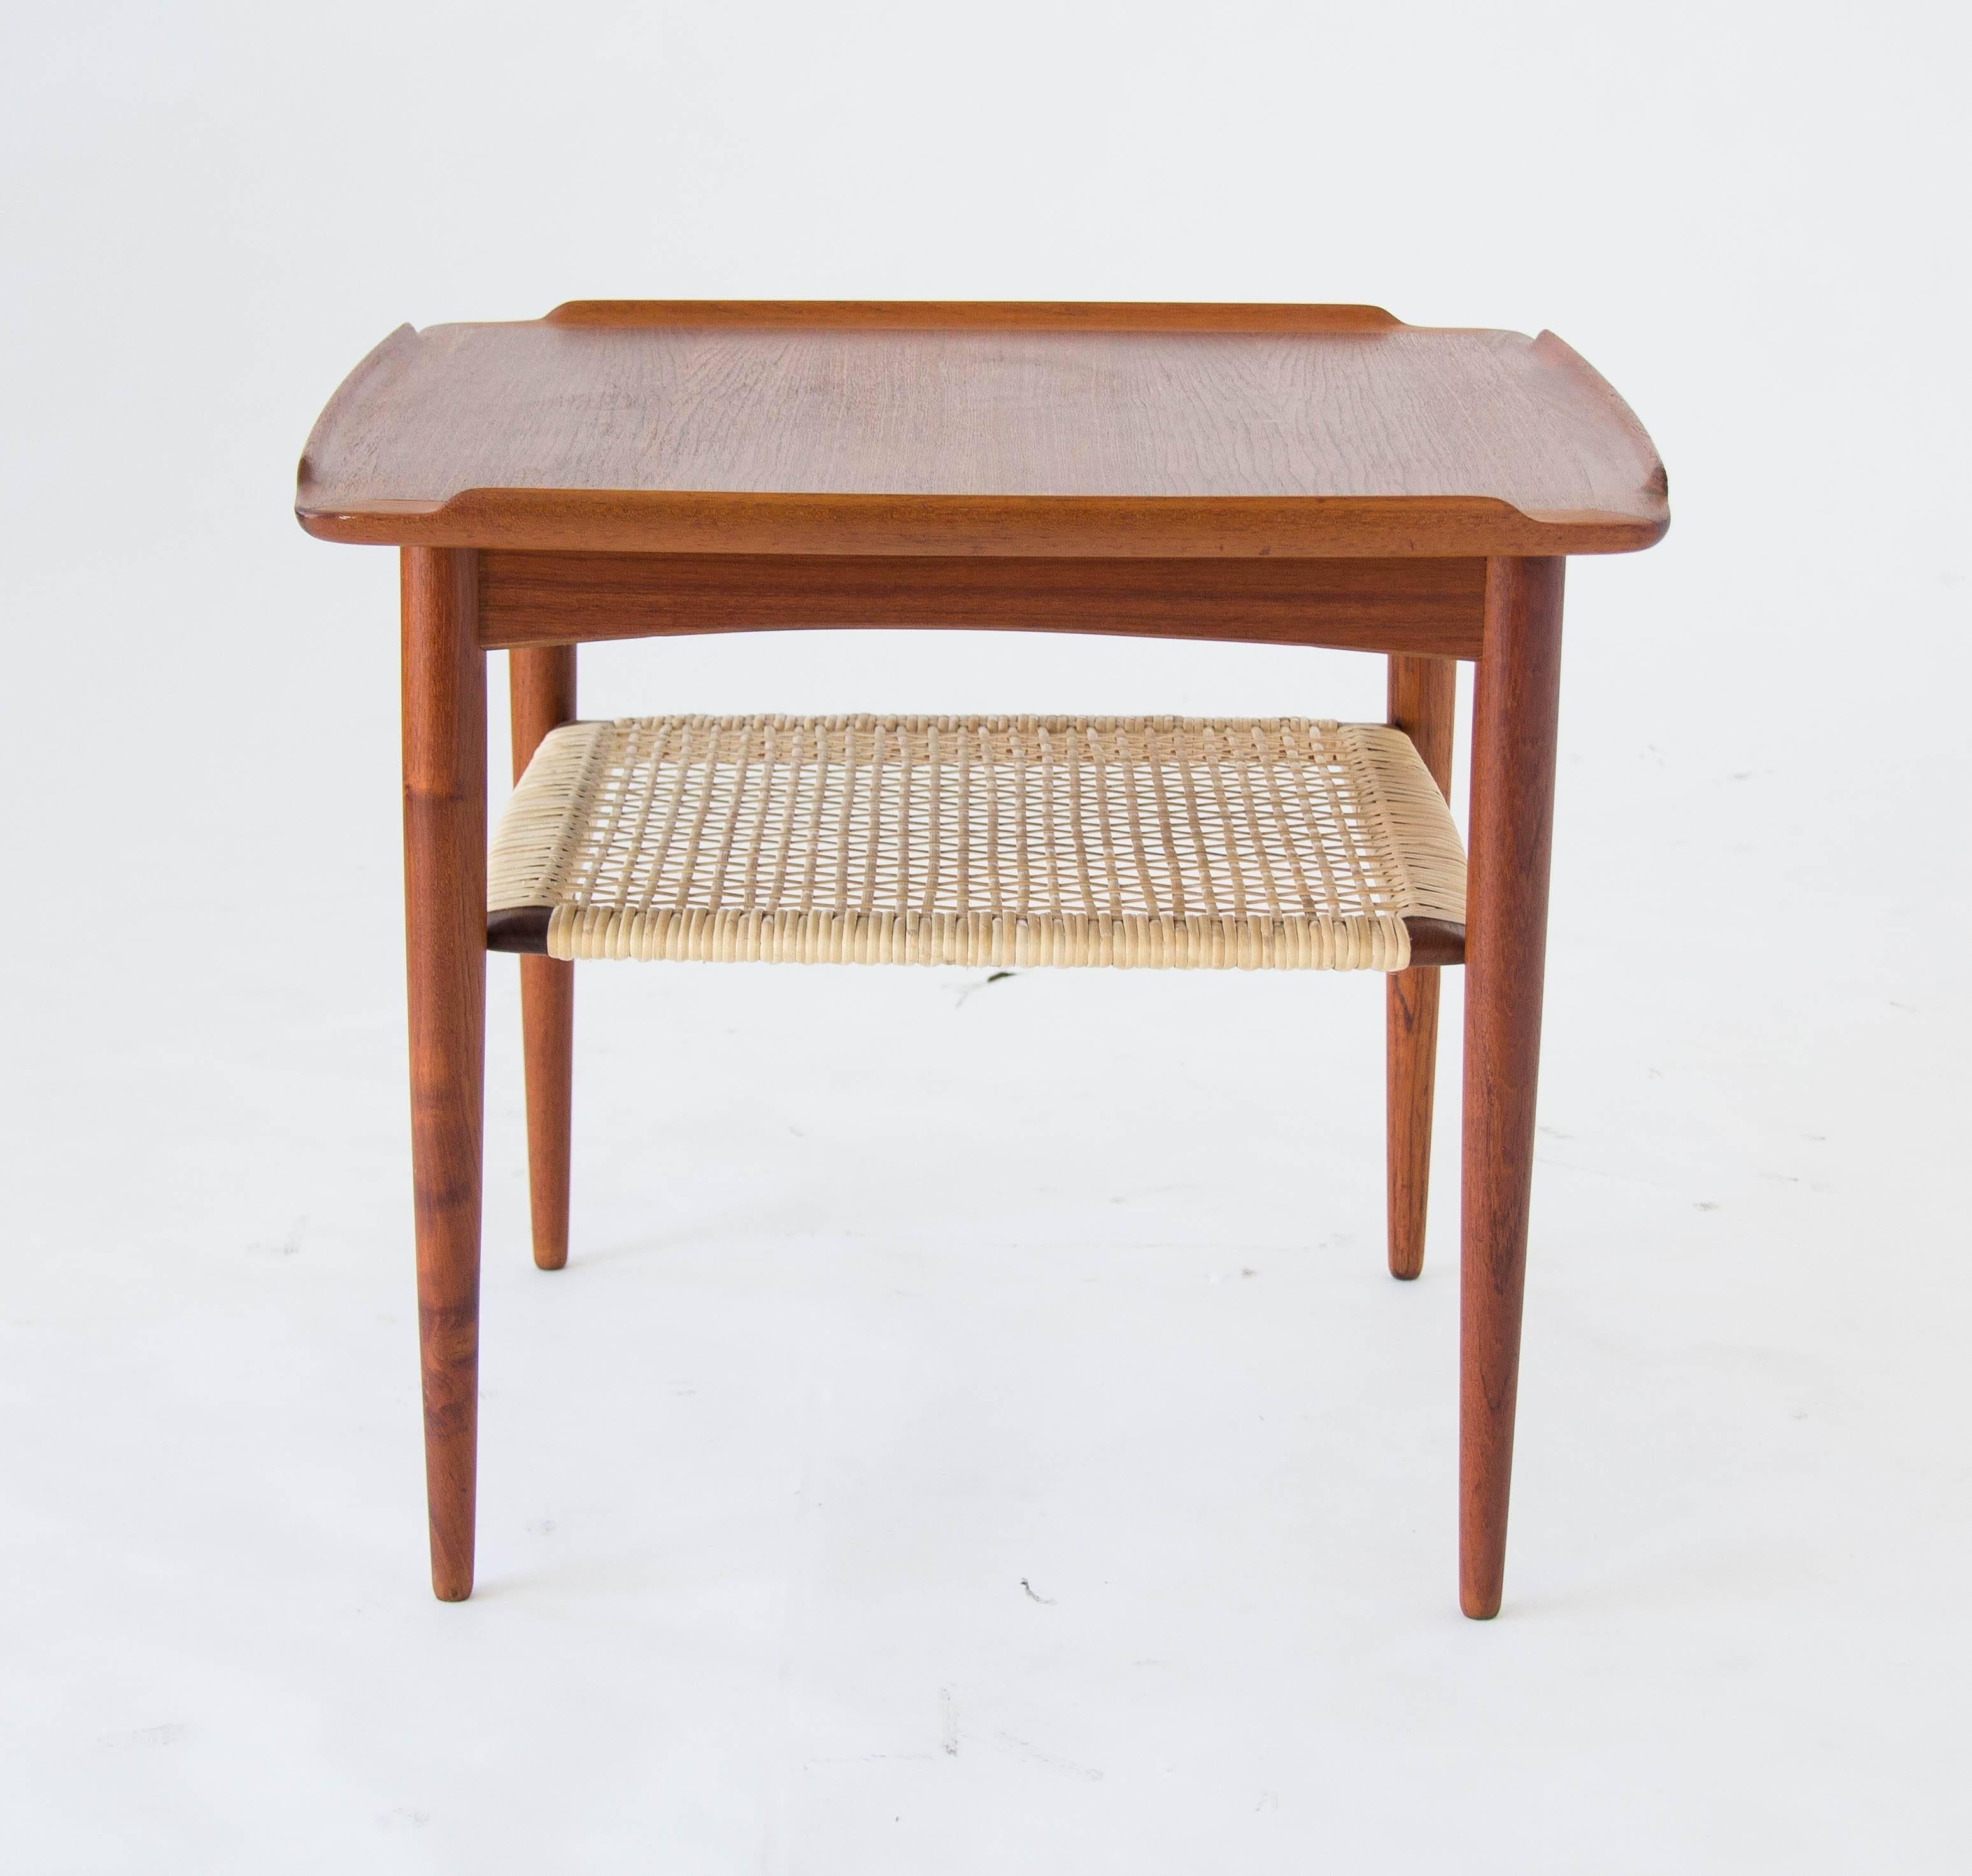 A square teak side table with a cane shelf. Designed by Poul Jensen and imported to the US by Selig, the table has a solid teak end piece with an upturned lip along each edge and an inlaid teak top. A shelf strung with woven cane is fixed to the